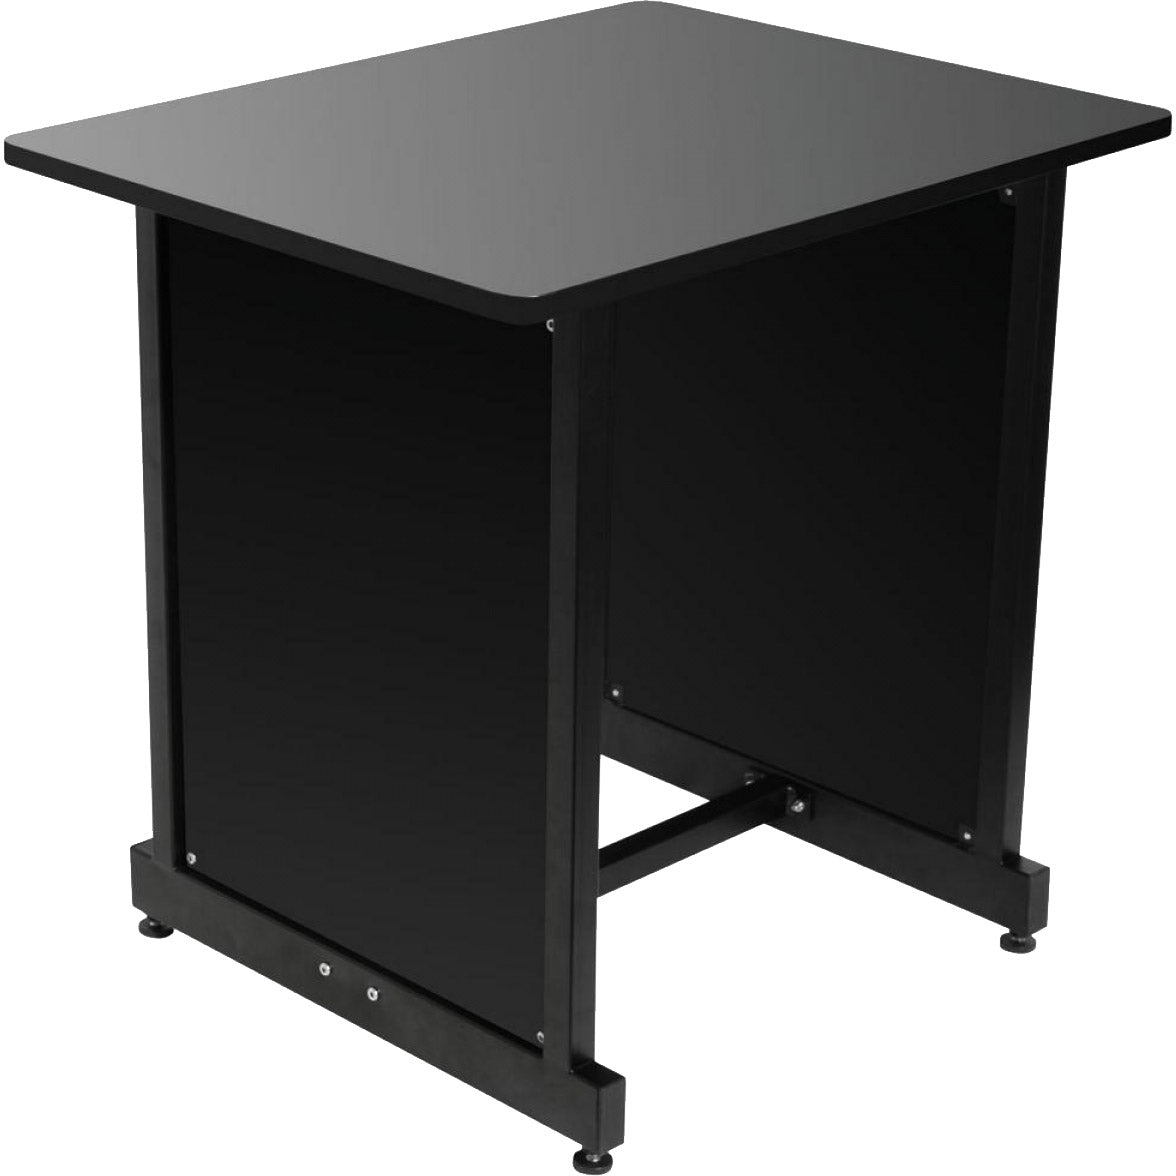 3/4 view of On-Stage WSR7500B Rack Cabinet - Black showing top, front and left side